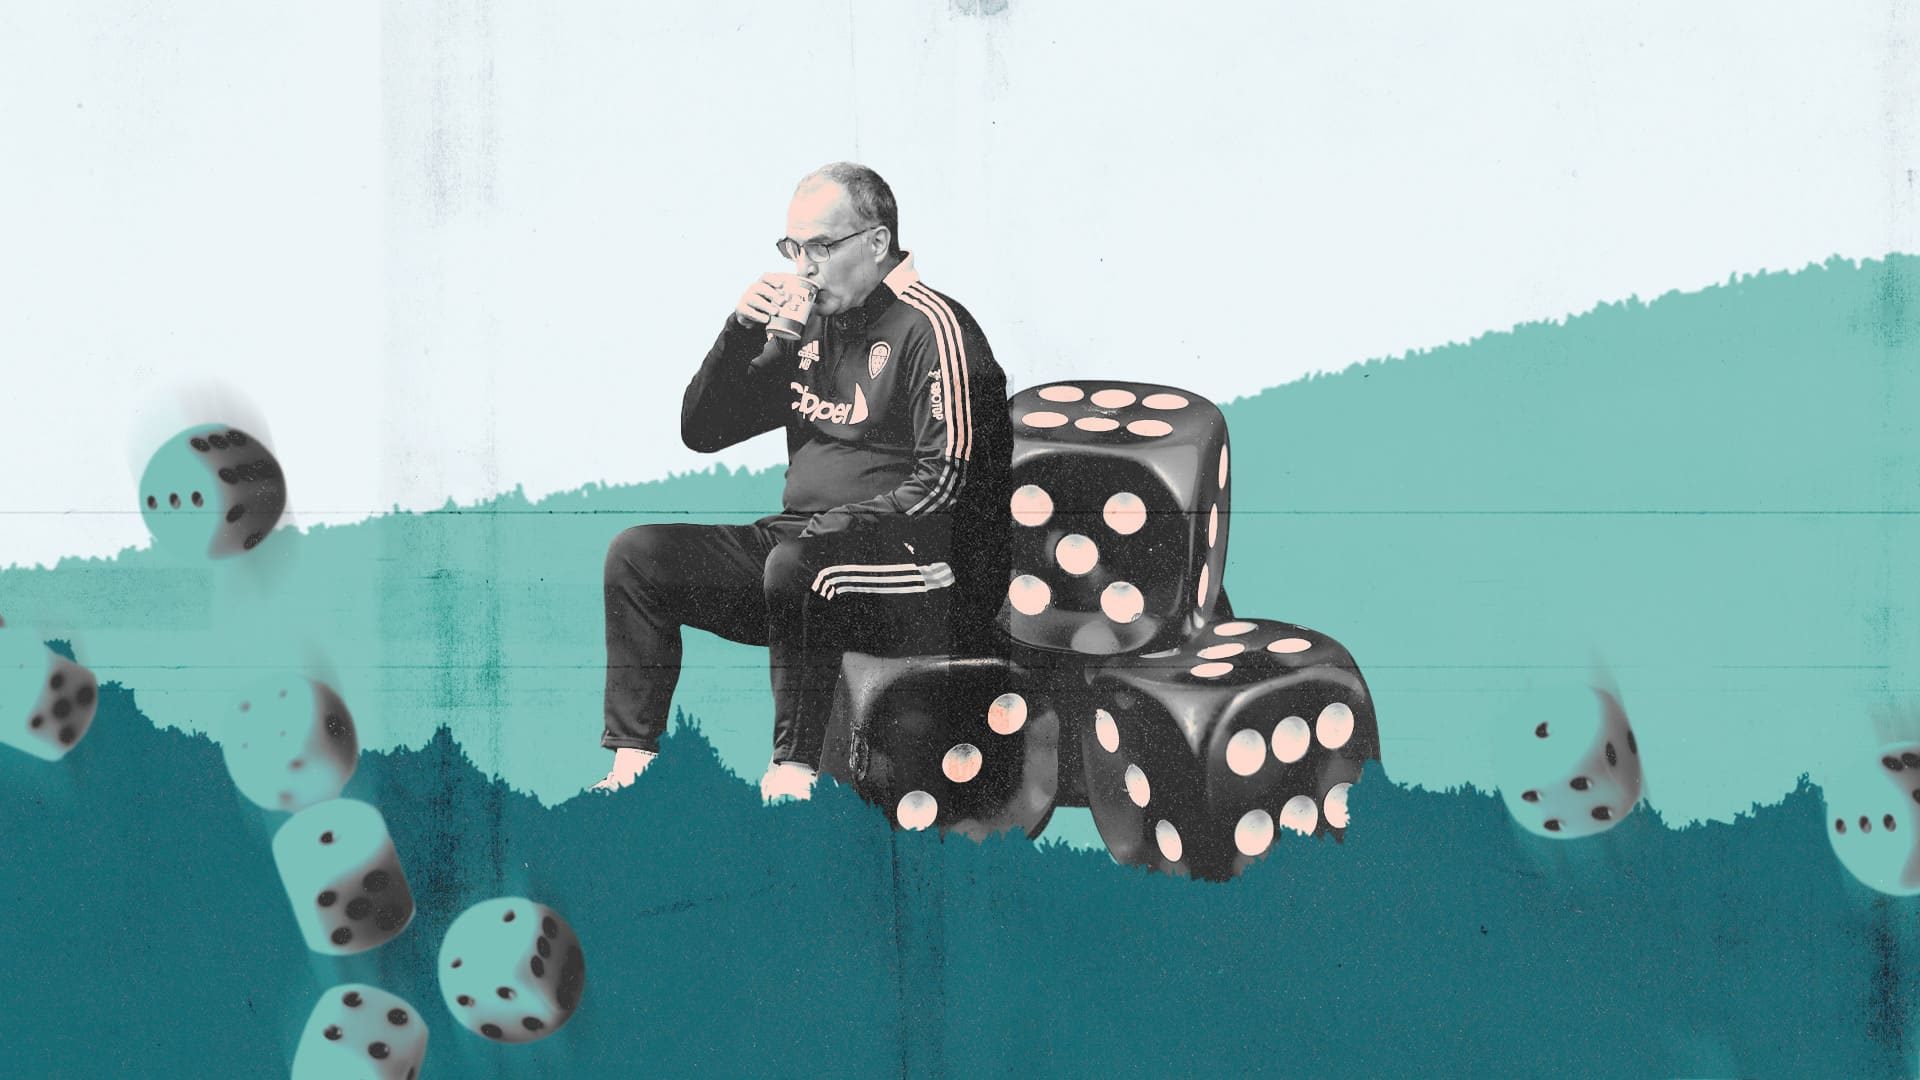 Marcelo Bielsa is sitting down and sipping coffee, only he's sitting on some massive dice (die?) instead of his bucket